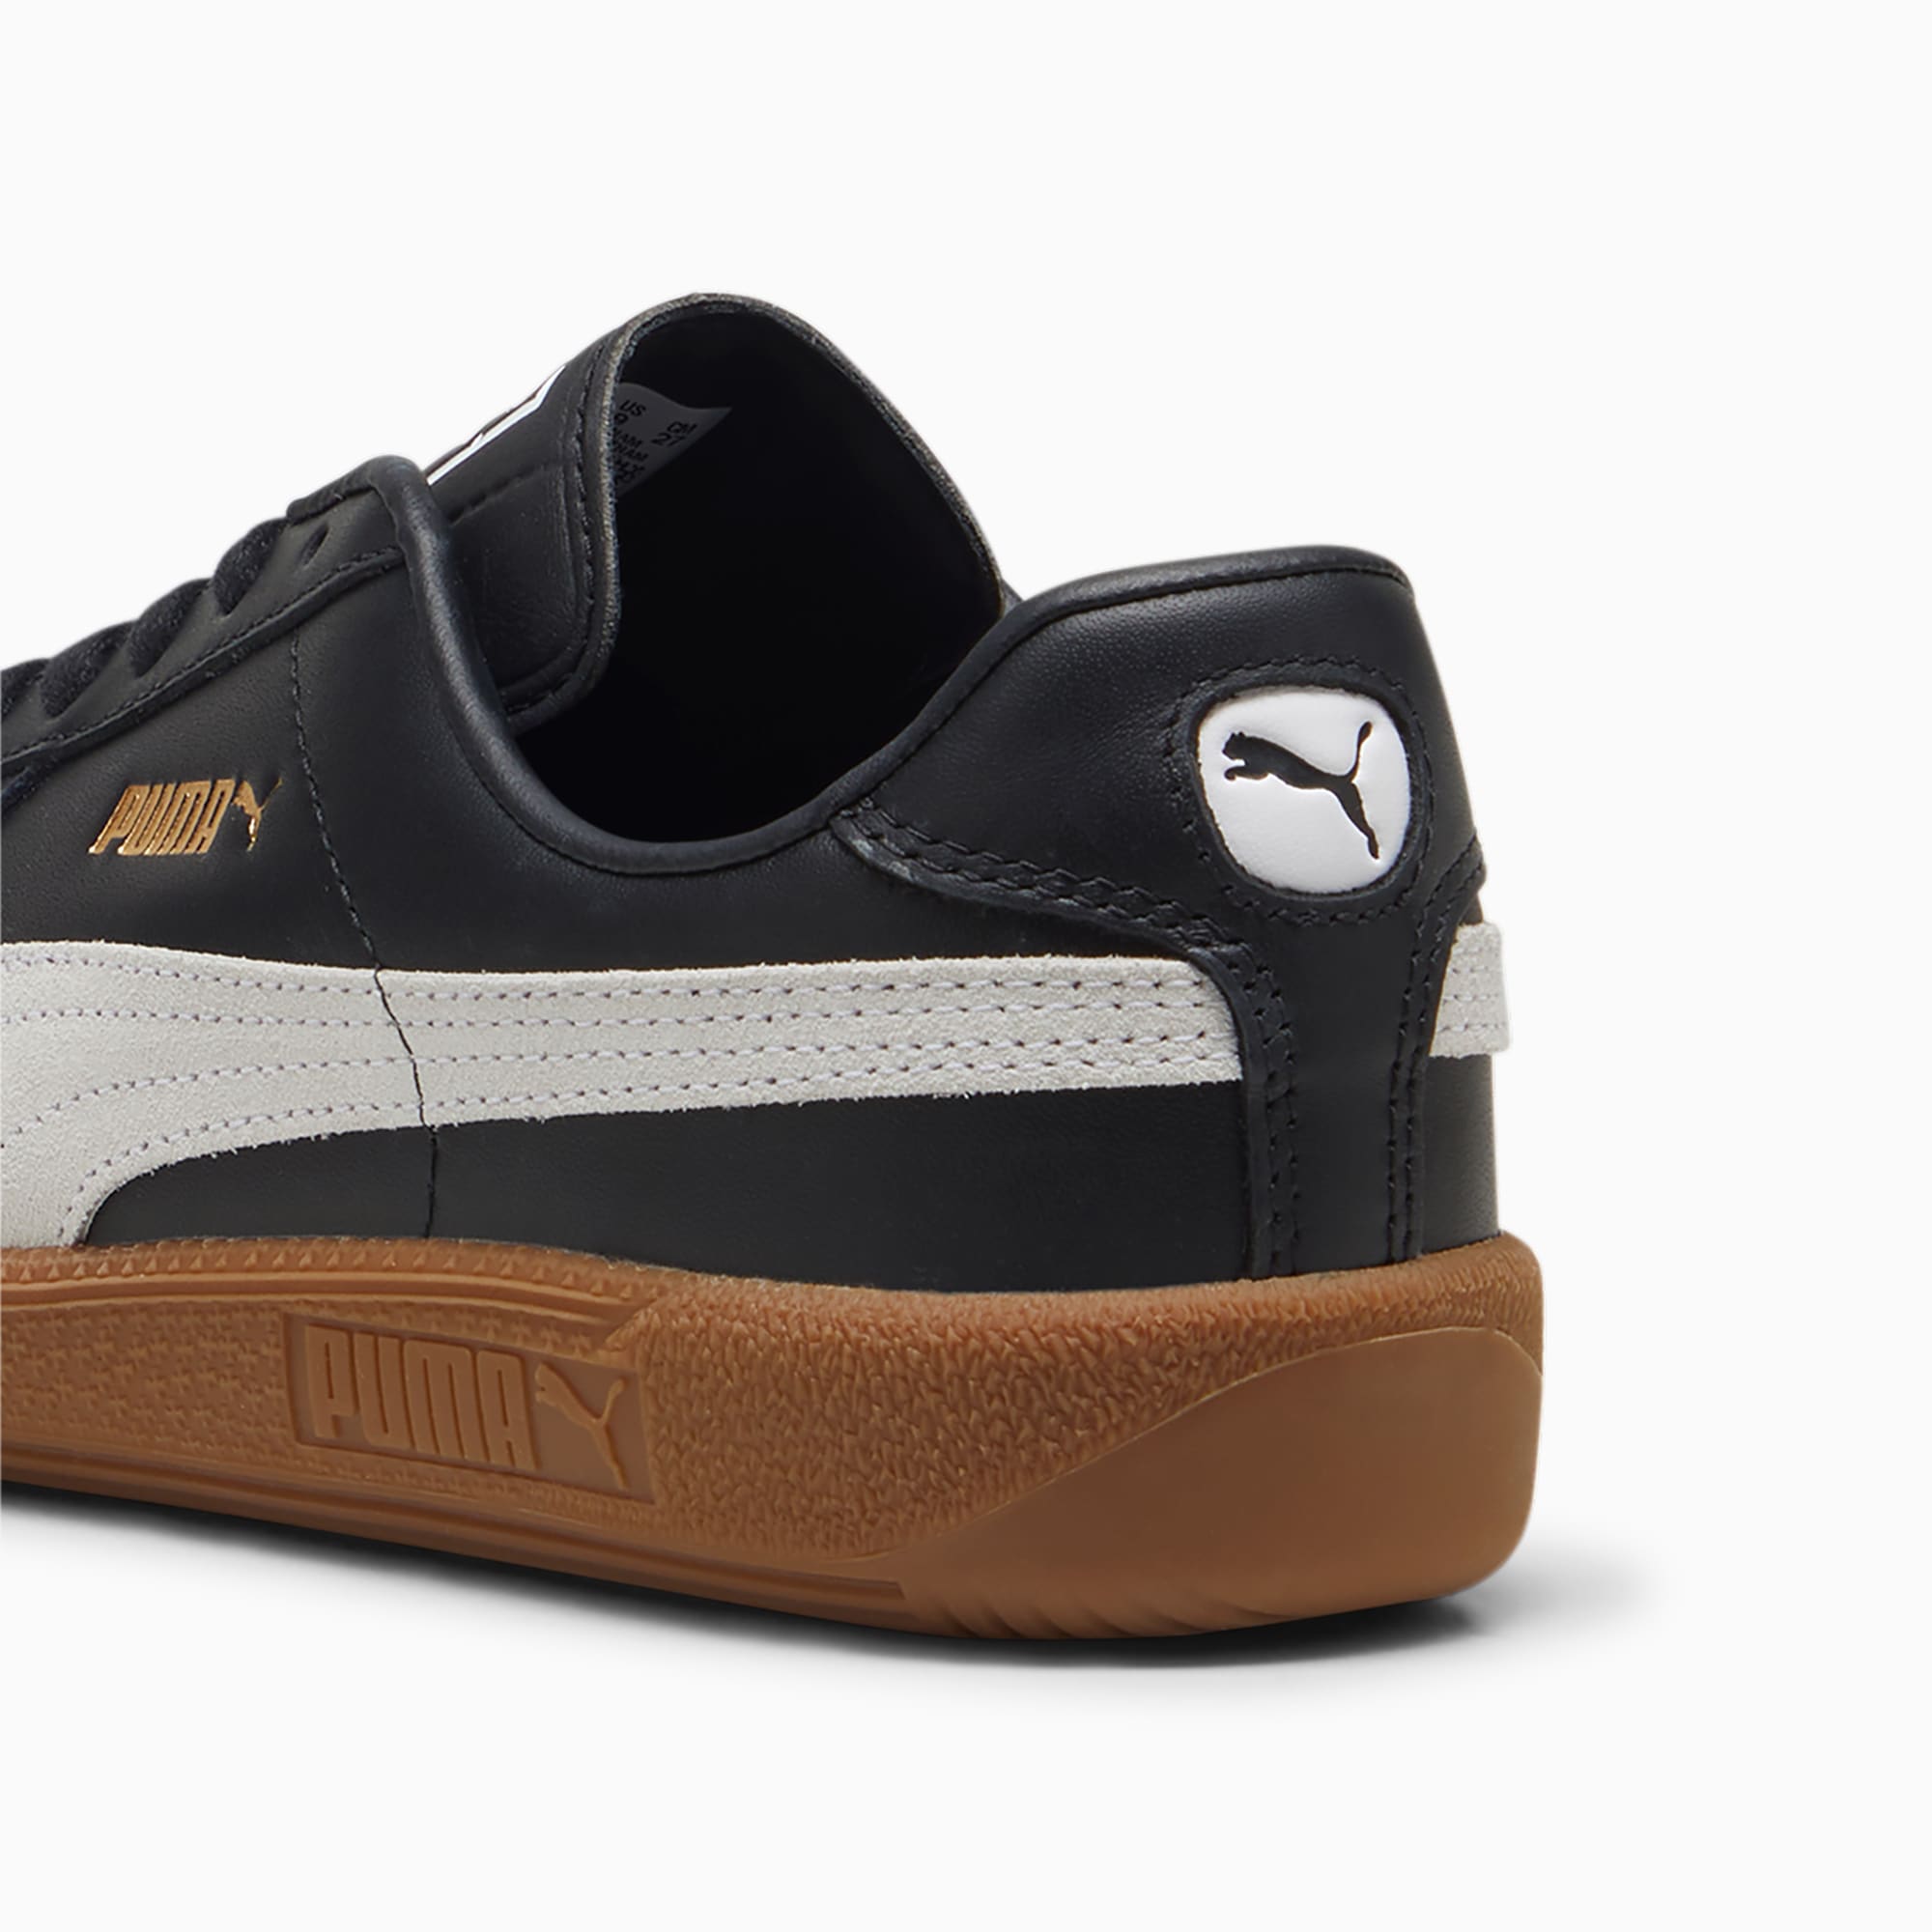 Women's PUMA Army Trainer Sneakers, Black/White/Gum, Size 37,5, Shoes